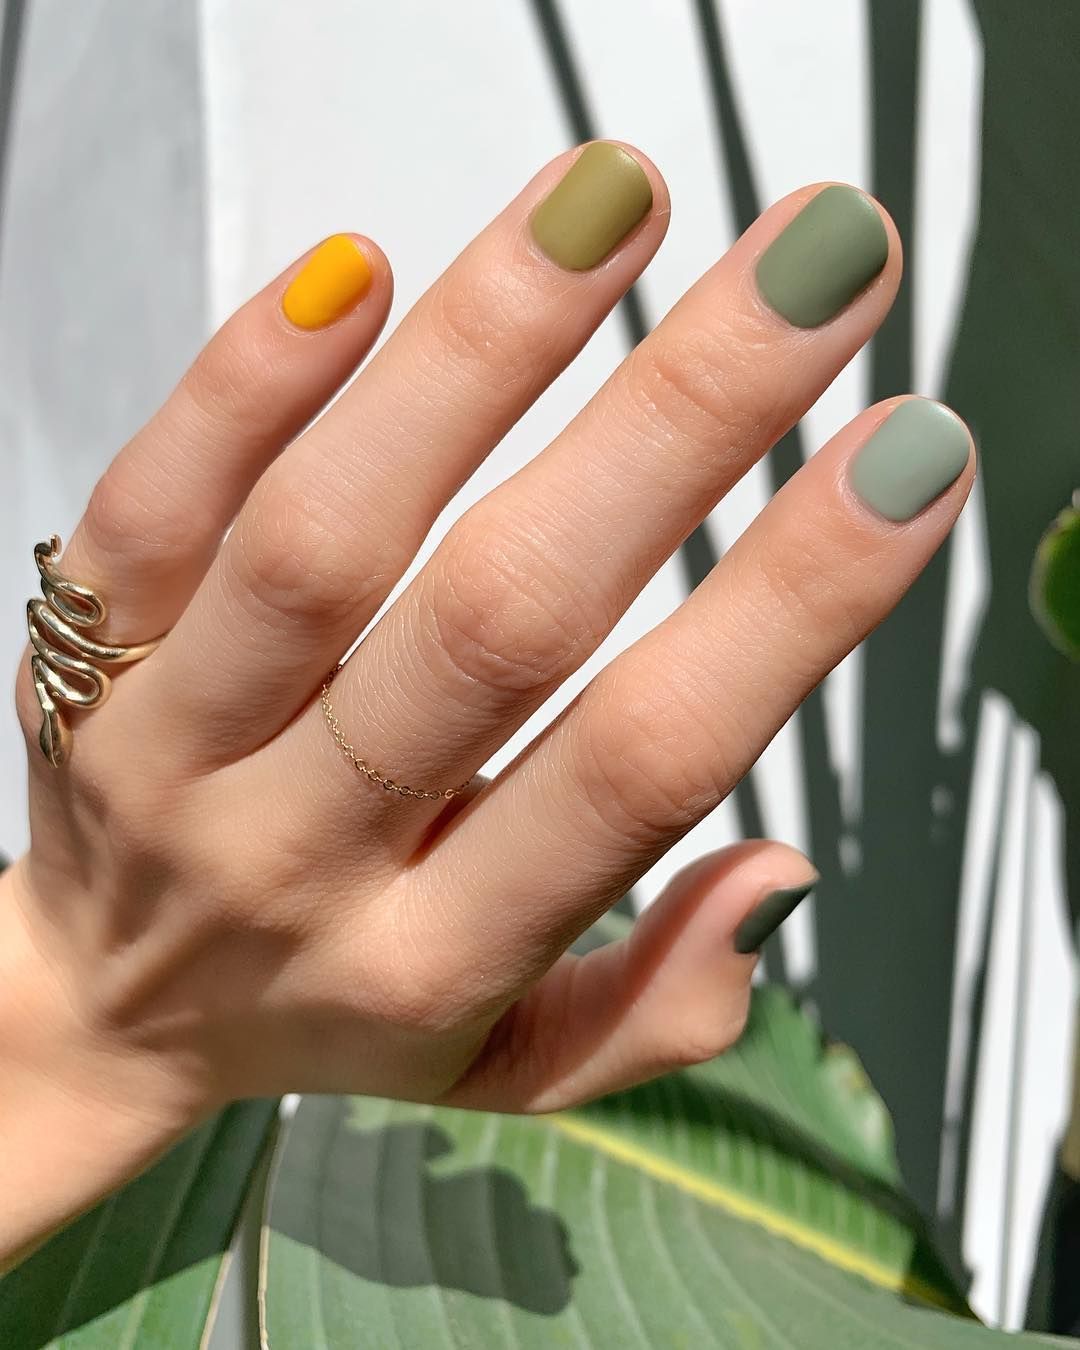 10 Beautiful Nail Designs To Wear This Fall - Wonder Forest - 10 Beautiful Nail Designs To Wear This Fall - Wonder Forest -   16 beauty Nails autumn ideas